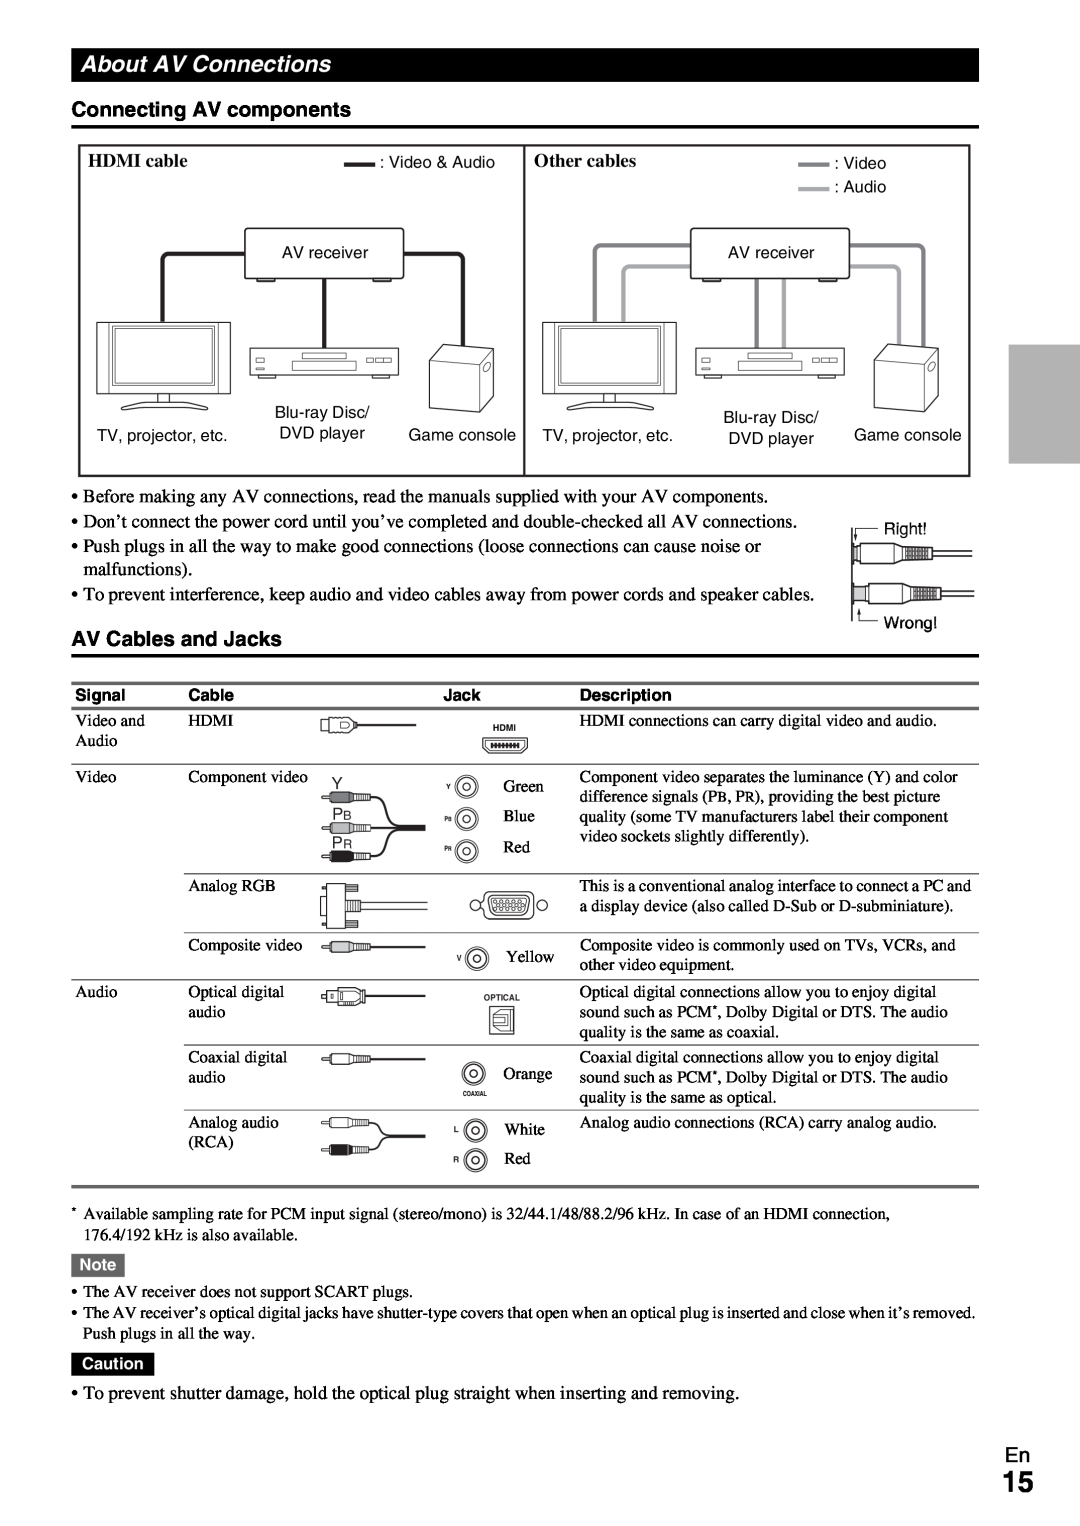 Onkyo HT-R990 instruction manual About AV Connections, Connecting AV components, AV Cables and Jacks 